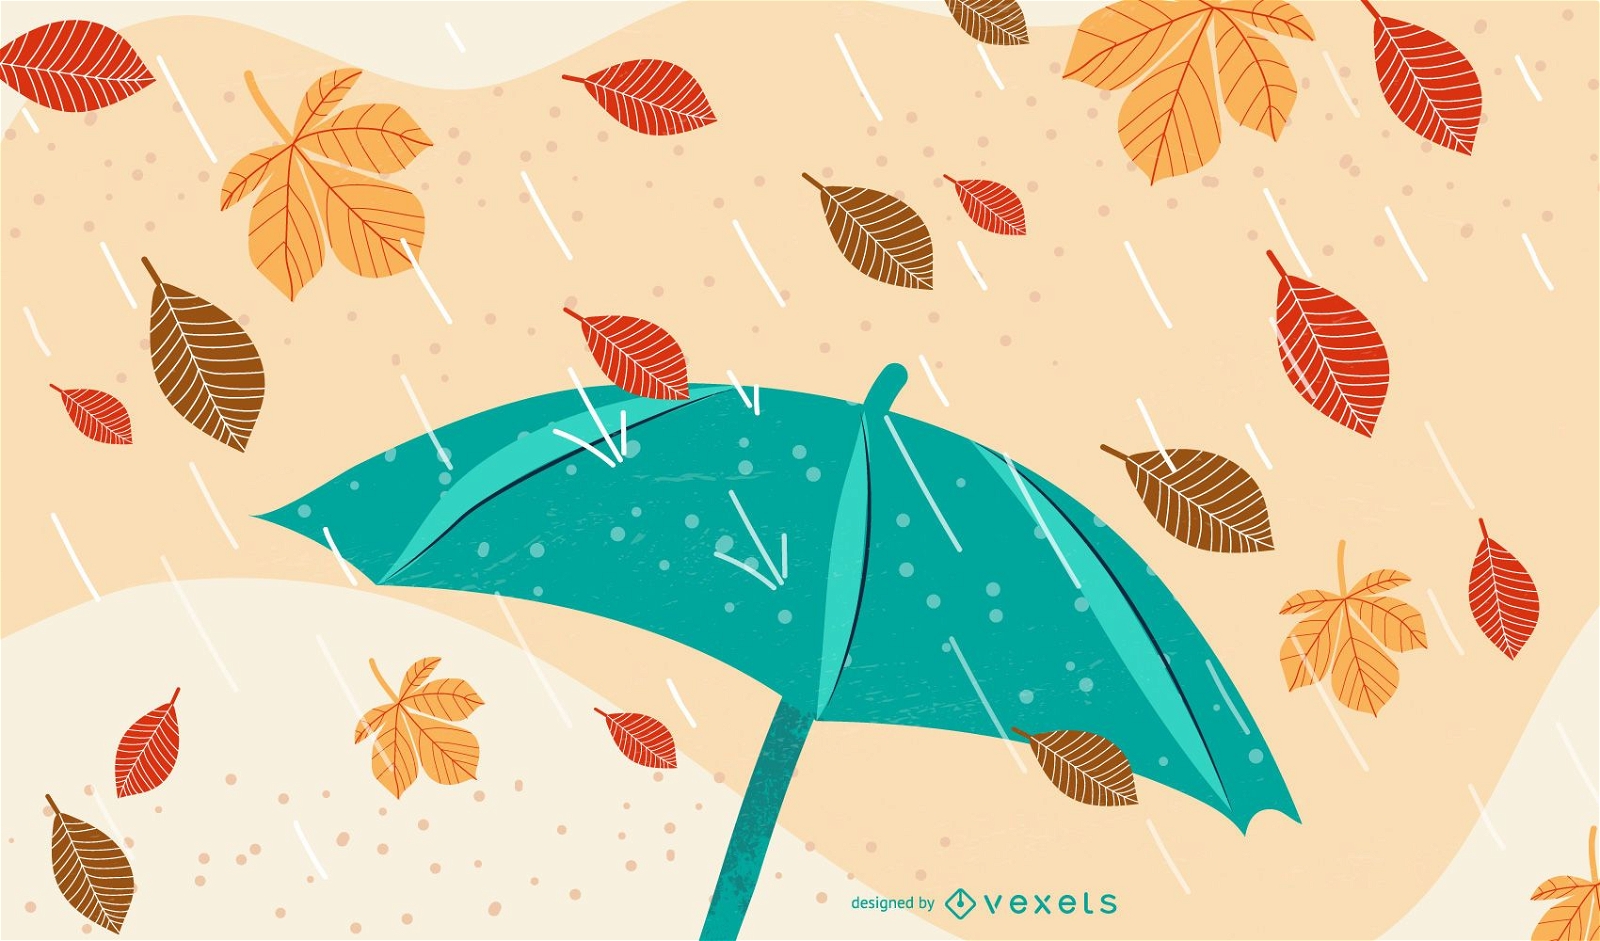 Funky Hand Drawn Autumn Leaves with Rain